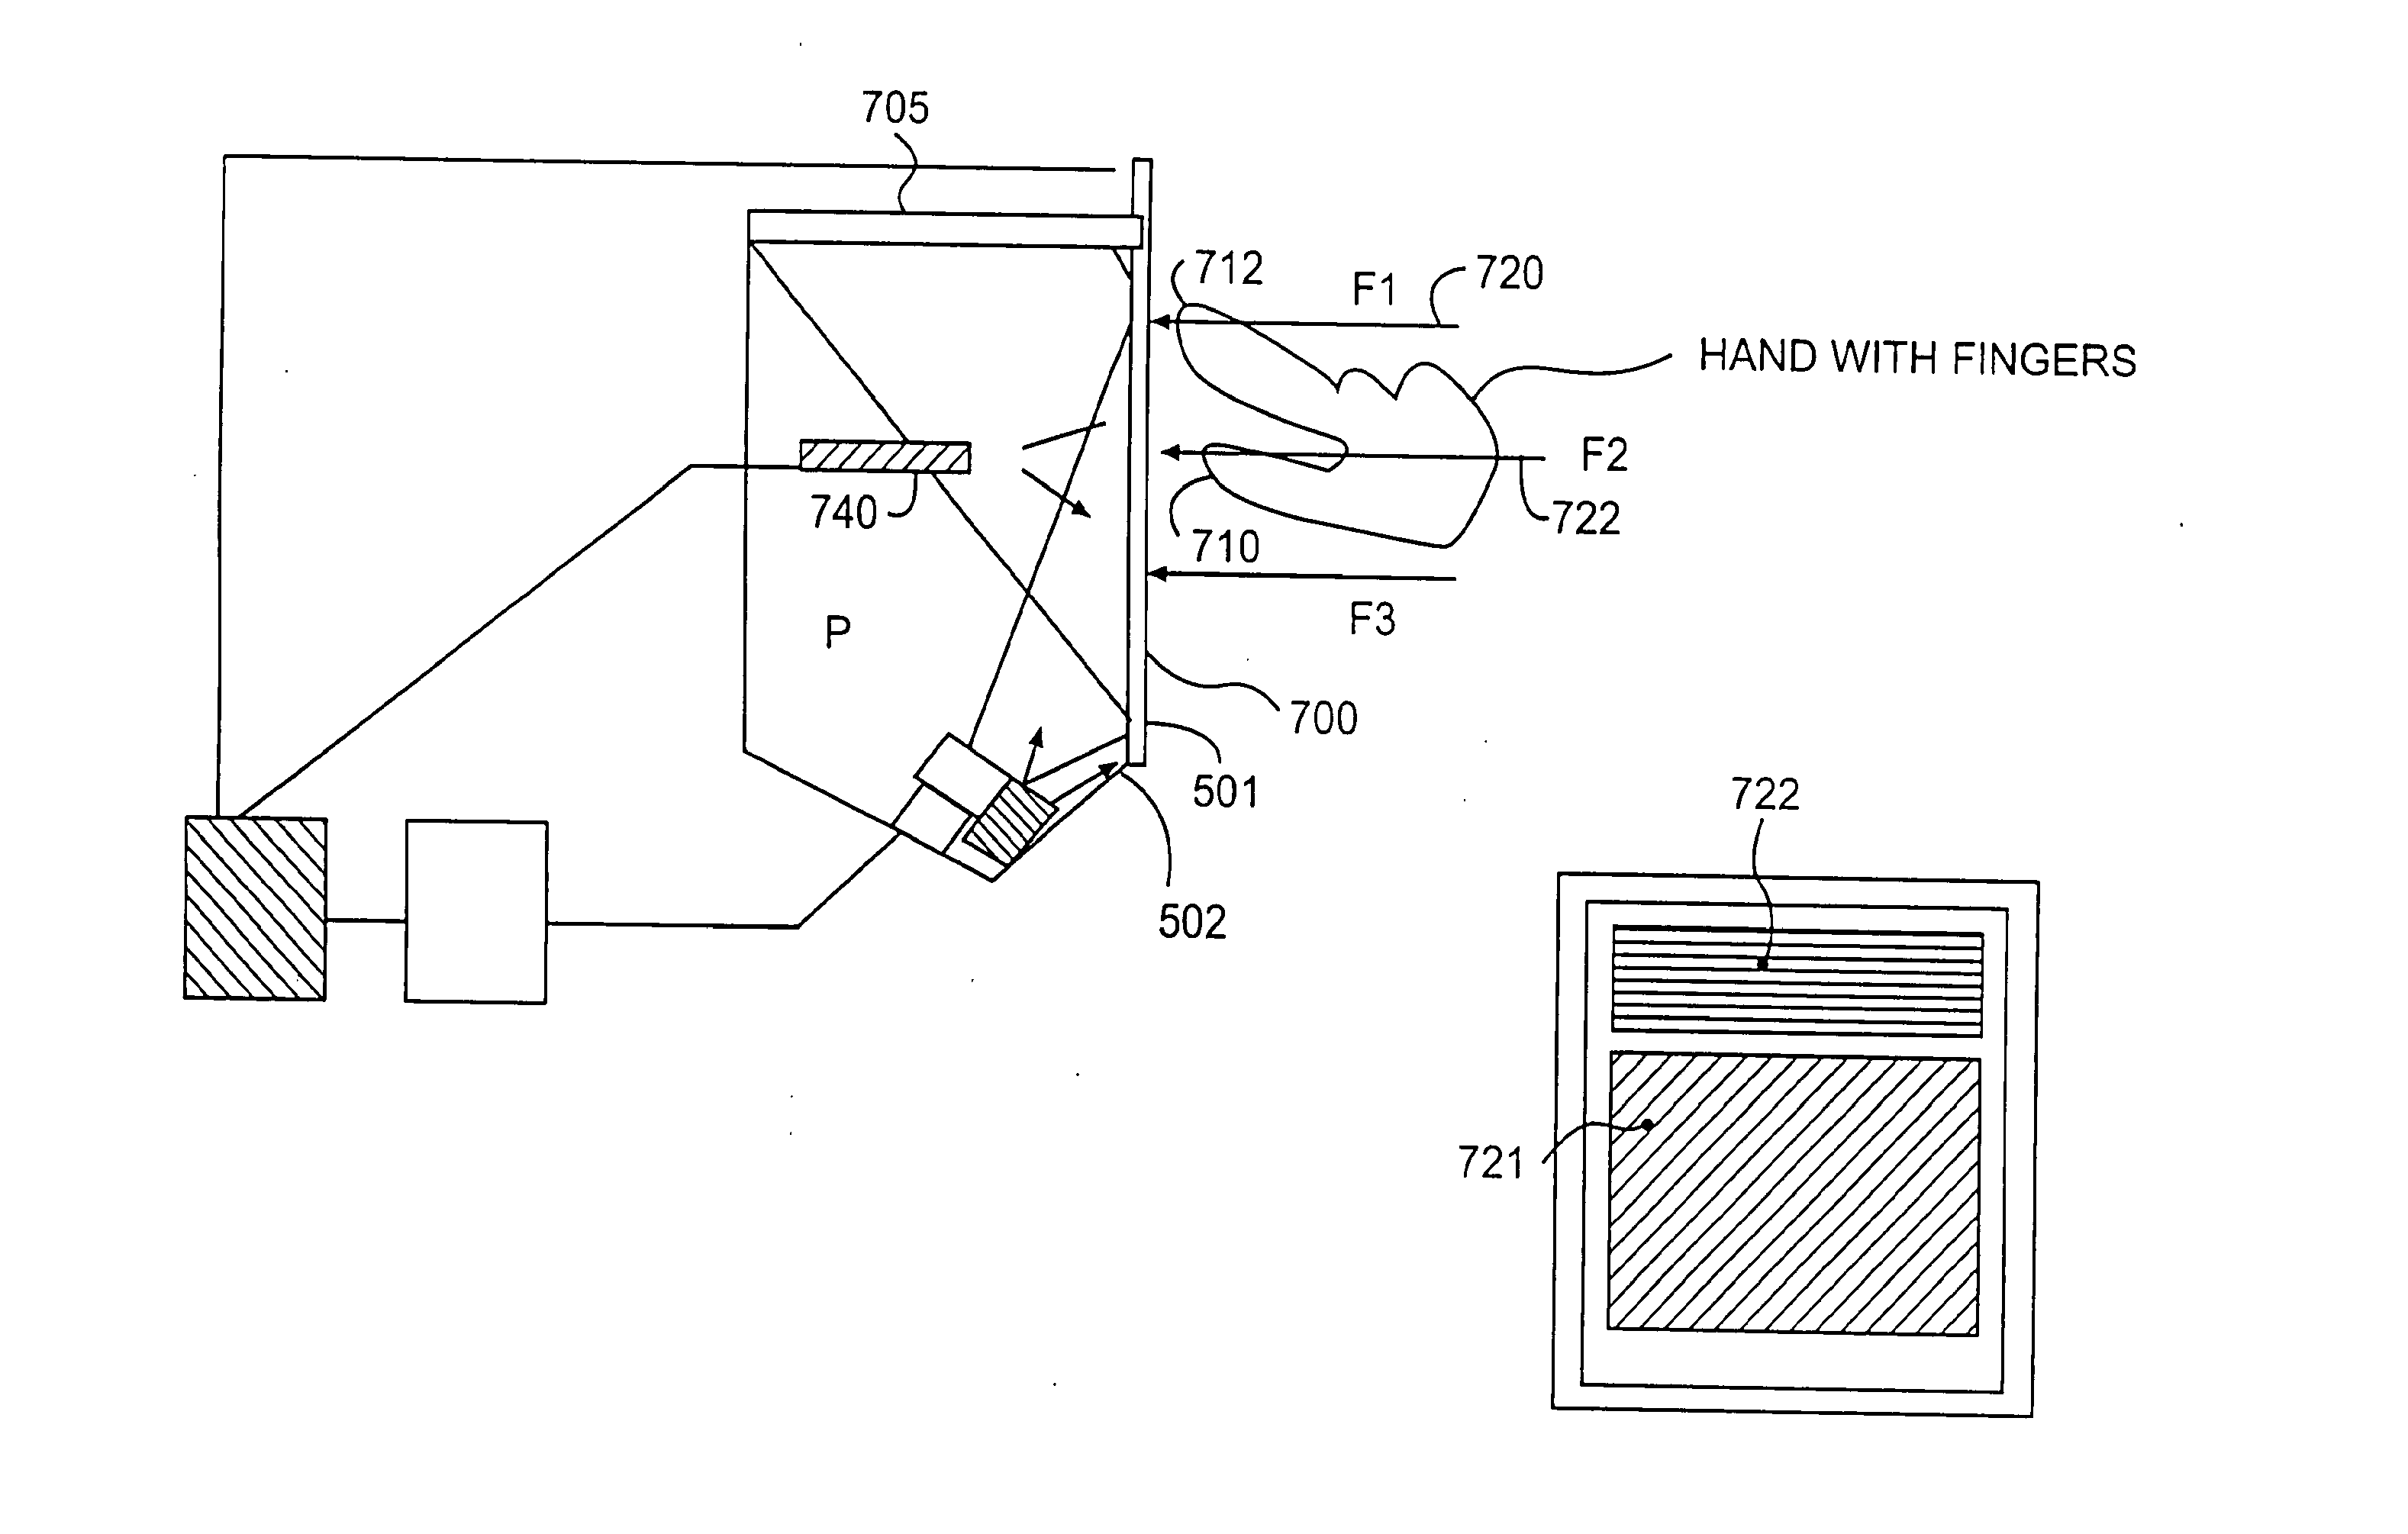 Method for providing human input to a computer